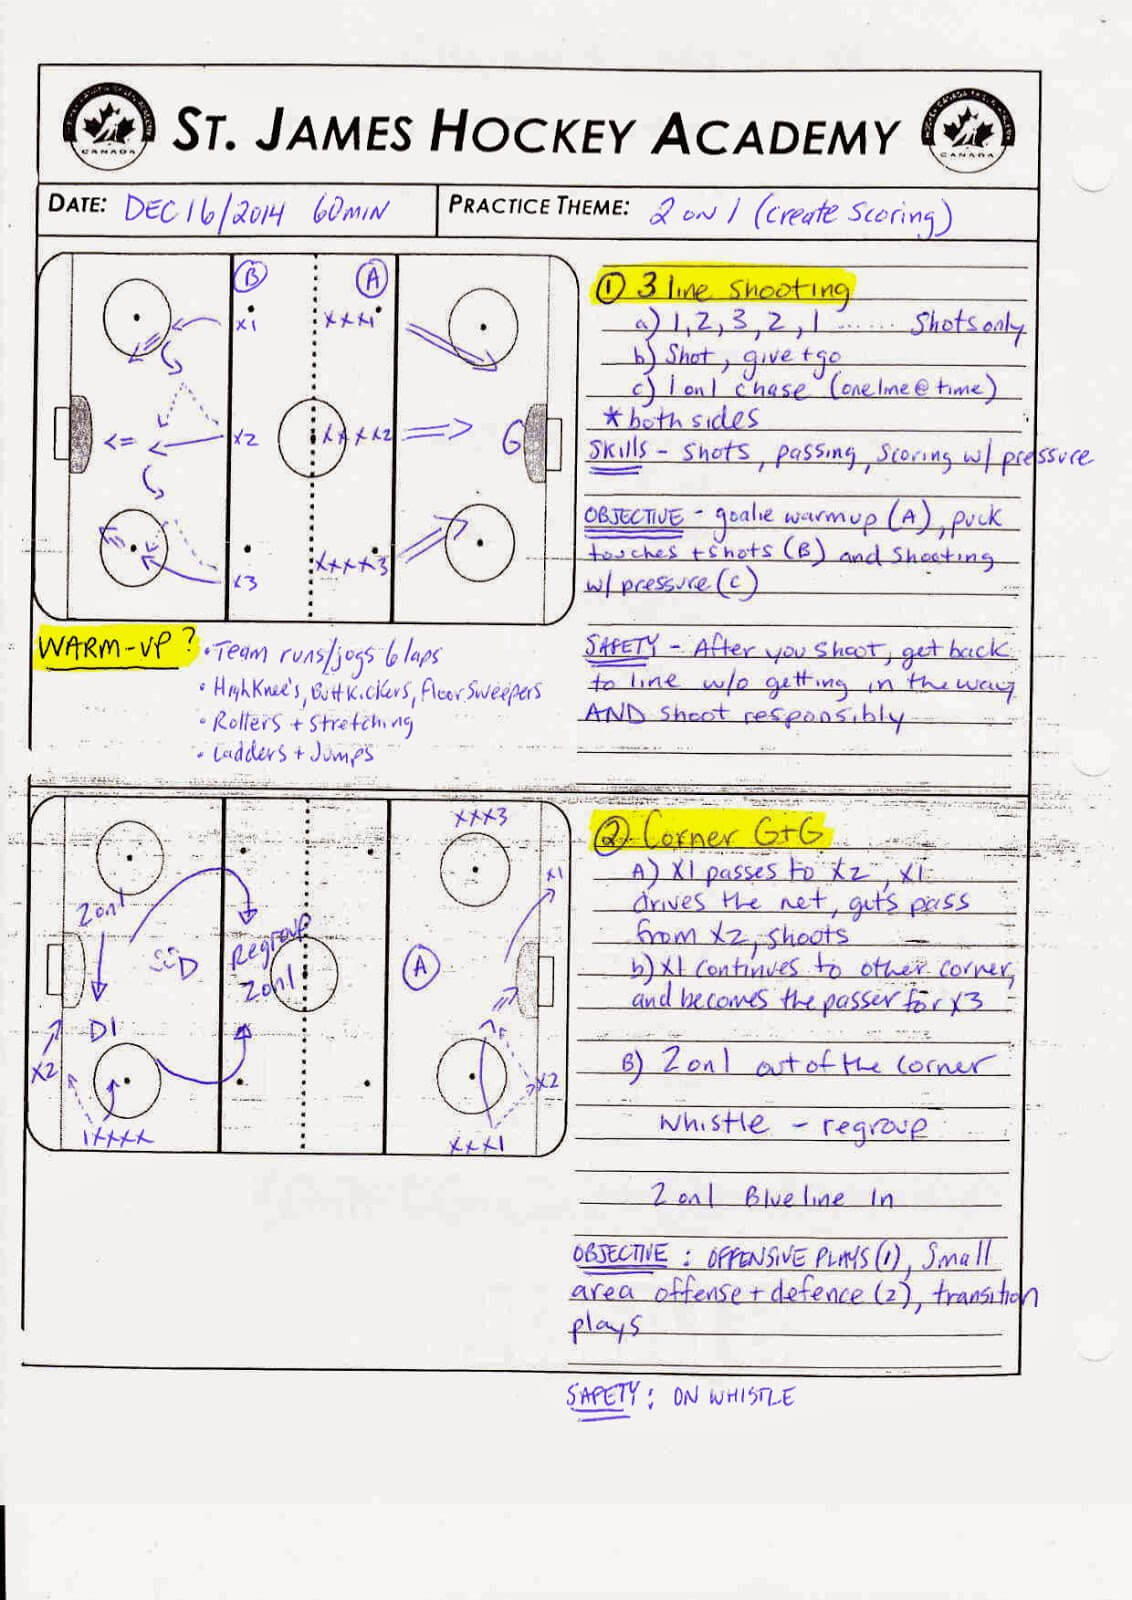 Pin Blank Practice Hockey Drill Sheets On Pinterest 5 Steps With Regard To Blank Hockey Practice Plan Template